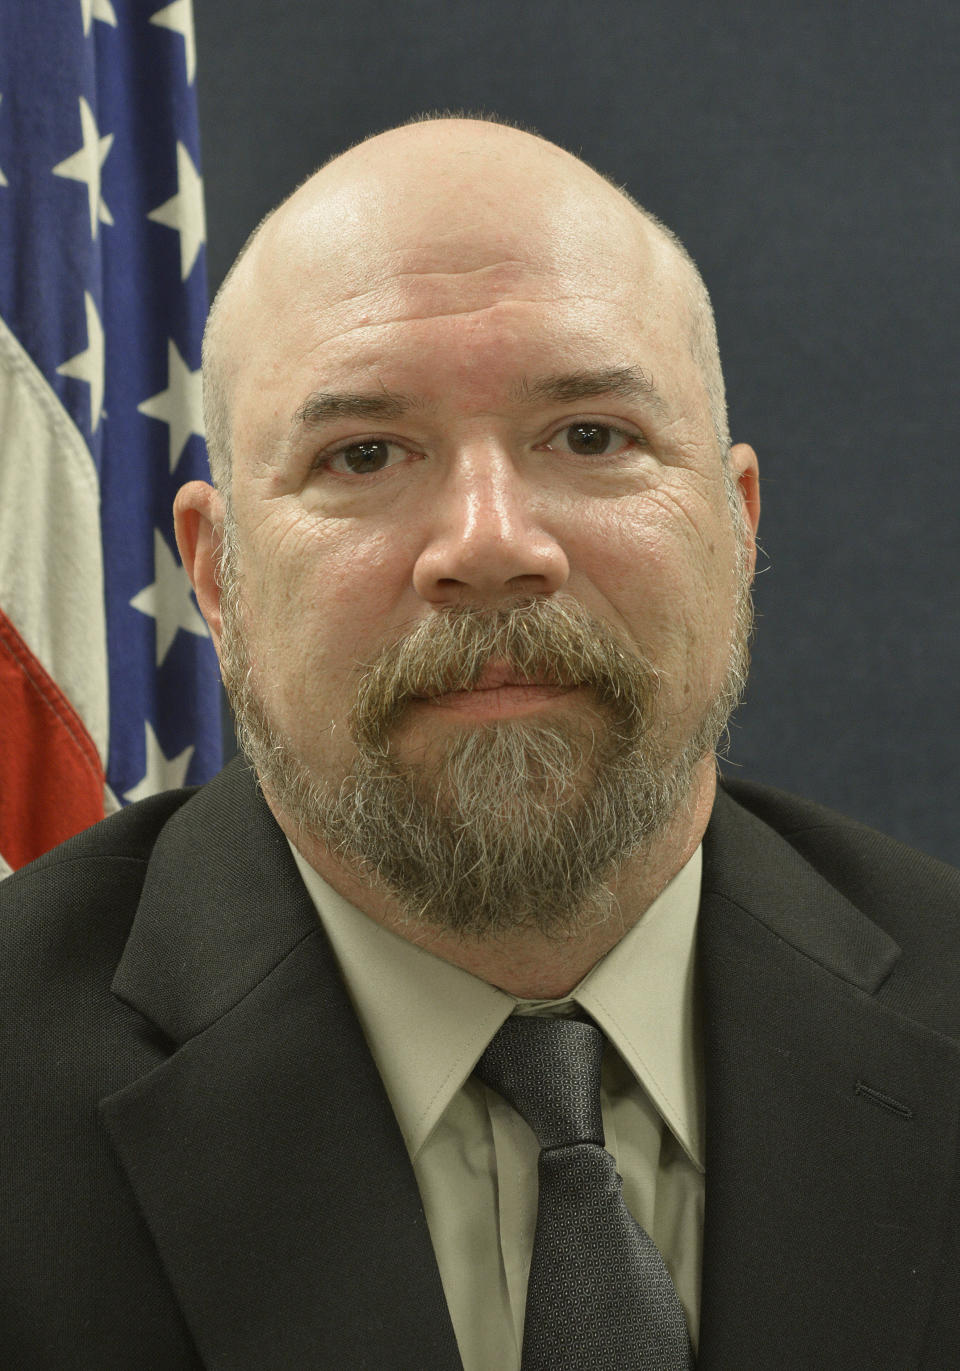 This 2018 photo provided by the Terre Haute Police Department shows Terre Haute Police Department Detective Greg Ferency. Investigators haven’t yet determined a motive for the ambush shooting of the police officer outside an FBI office in western Indiana, an FBI official said Thursday, July 8, 2021. The shooting killed Ferency, a 30-year department veteran who had been a federal task force officer since 2010. (Terre Haute Police Department via AP)